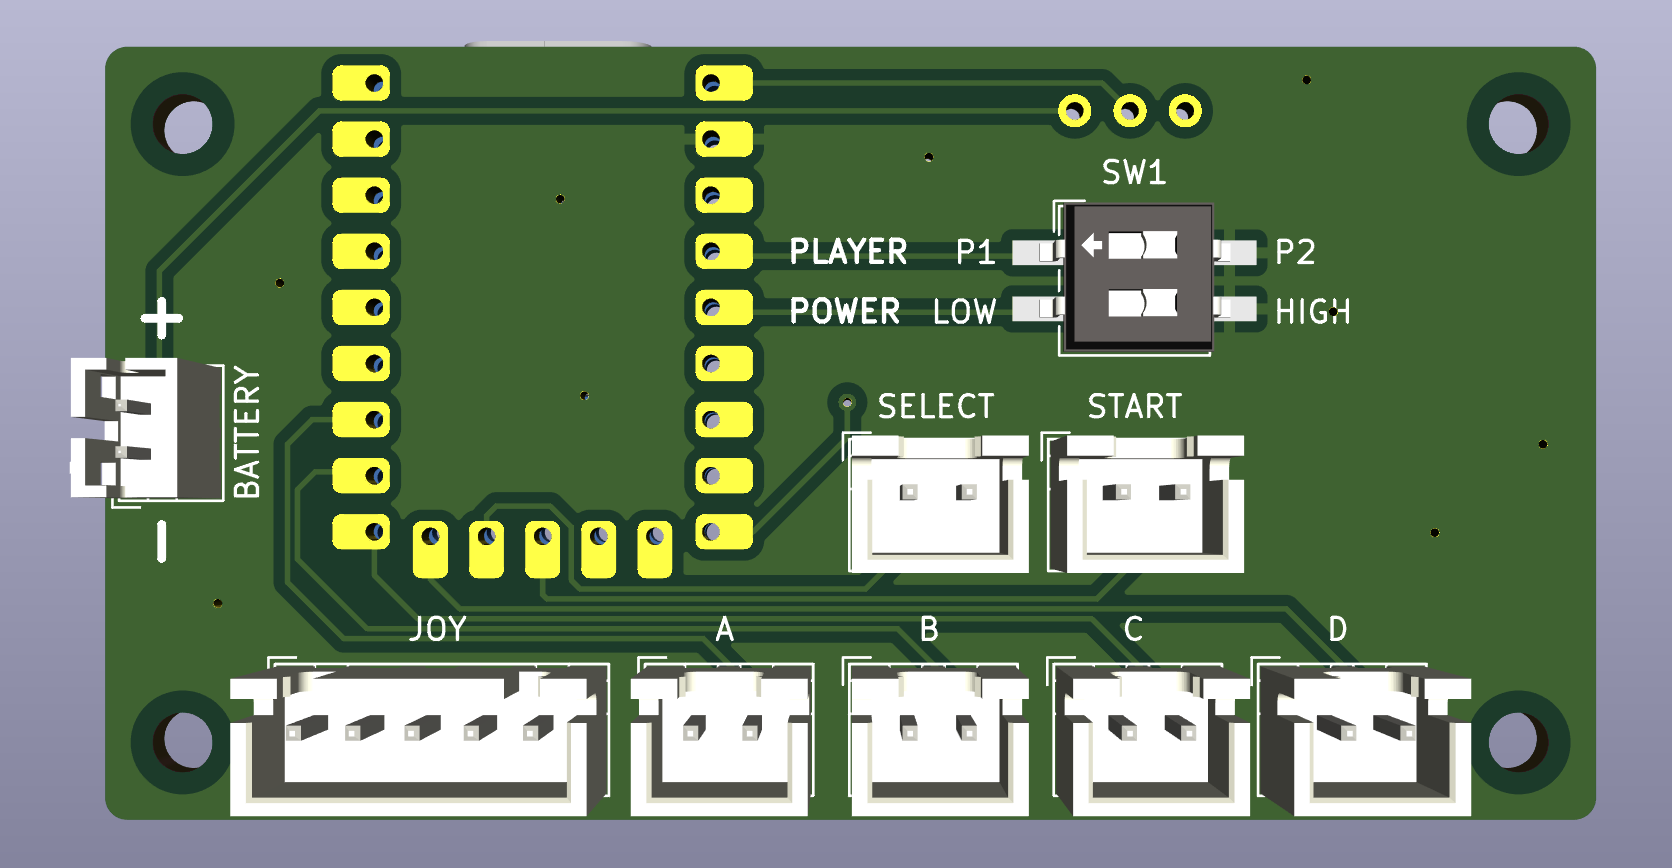 Changes to the NG2040 controller board